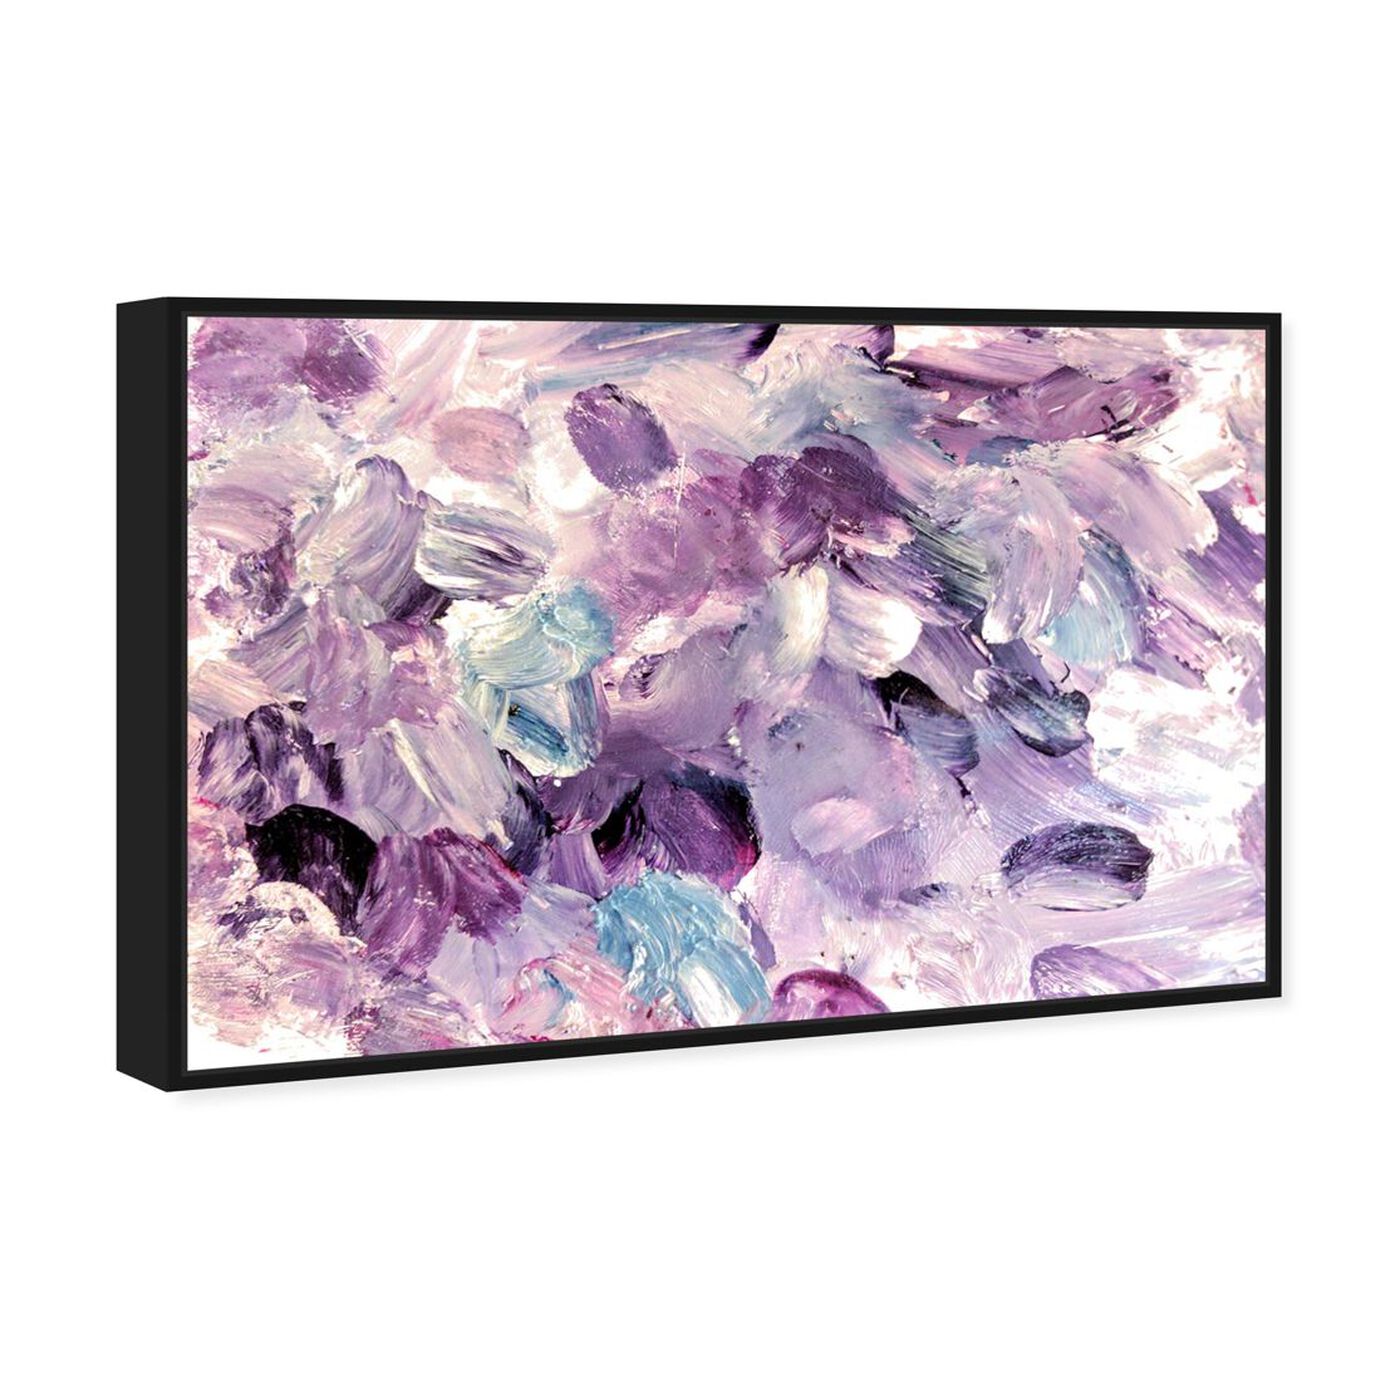 Angled view of Amethyst Gardens featuring abstract and paint art.